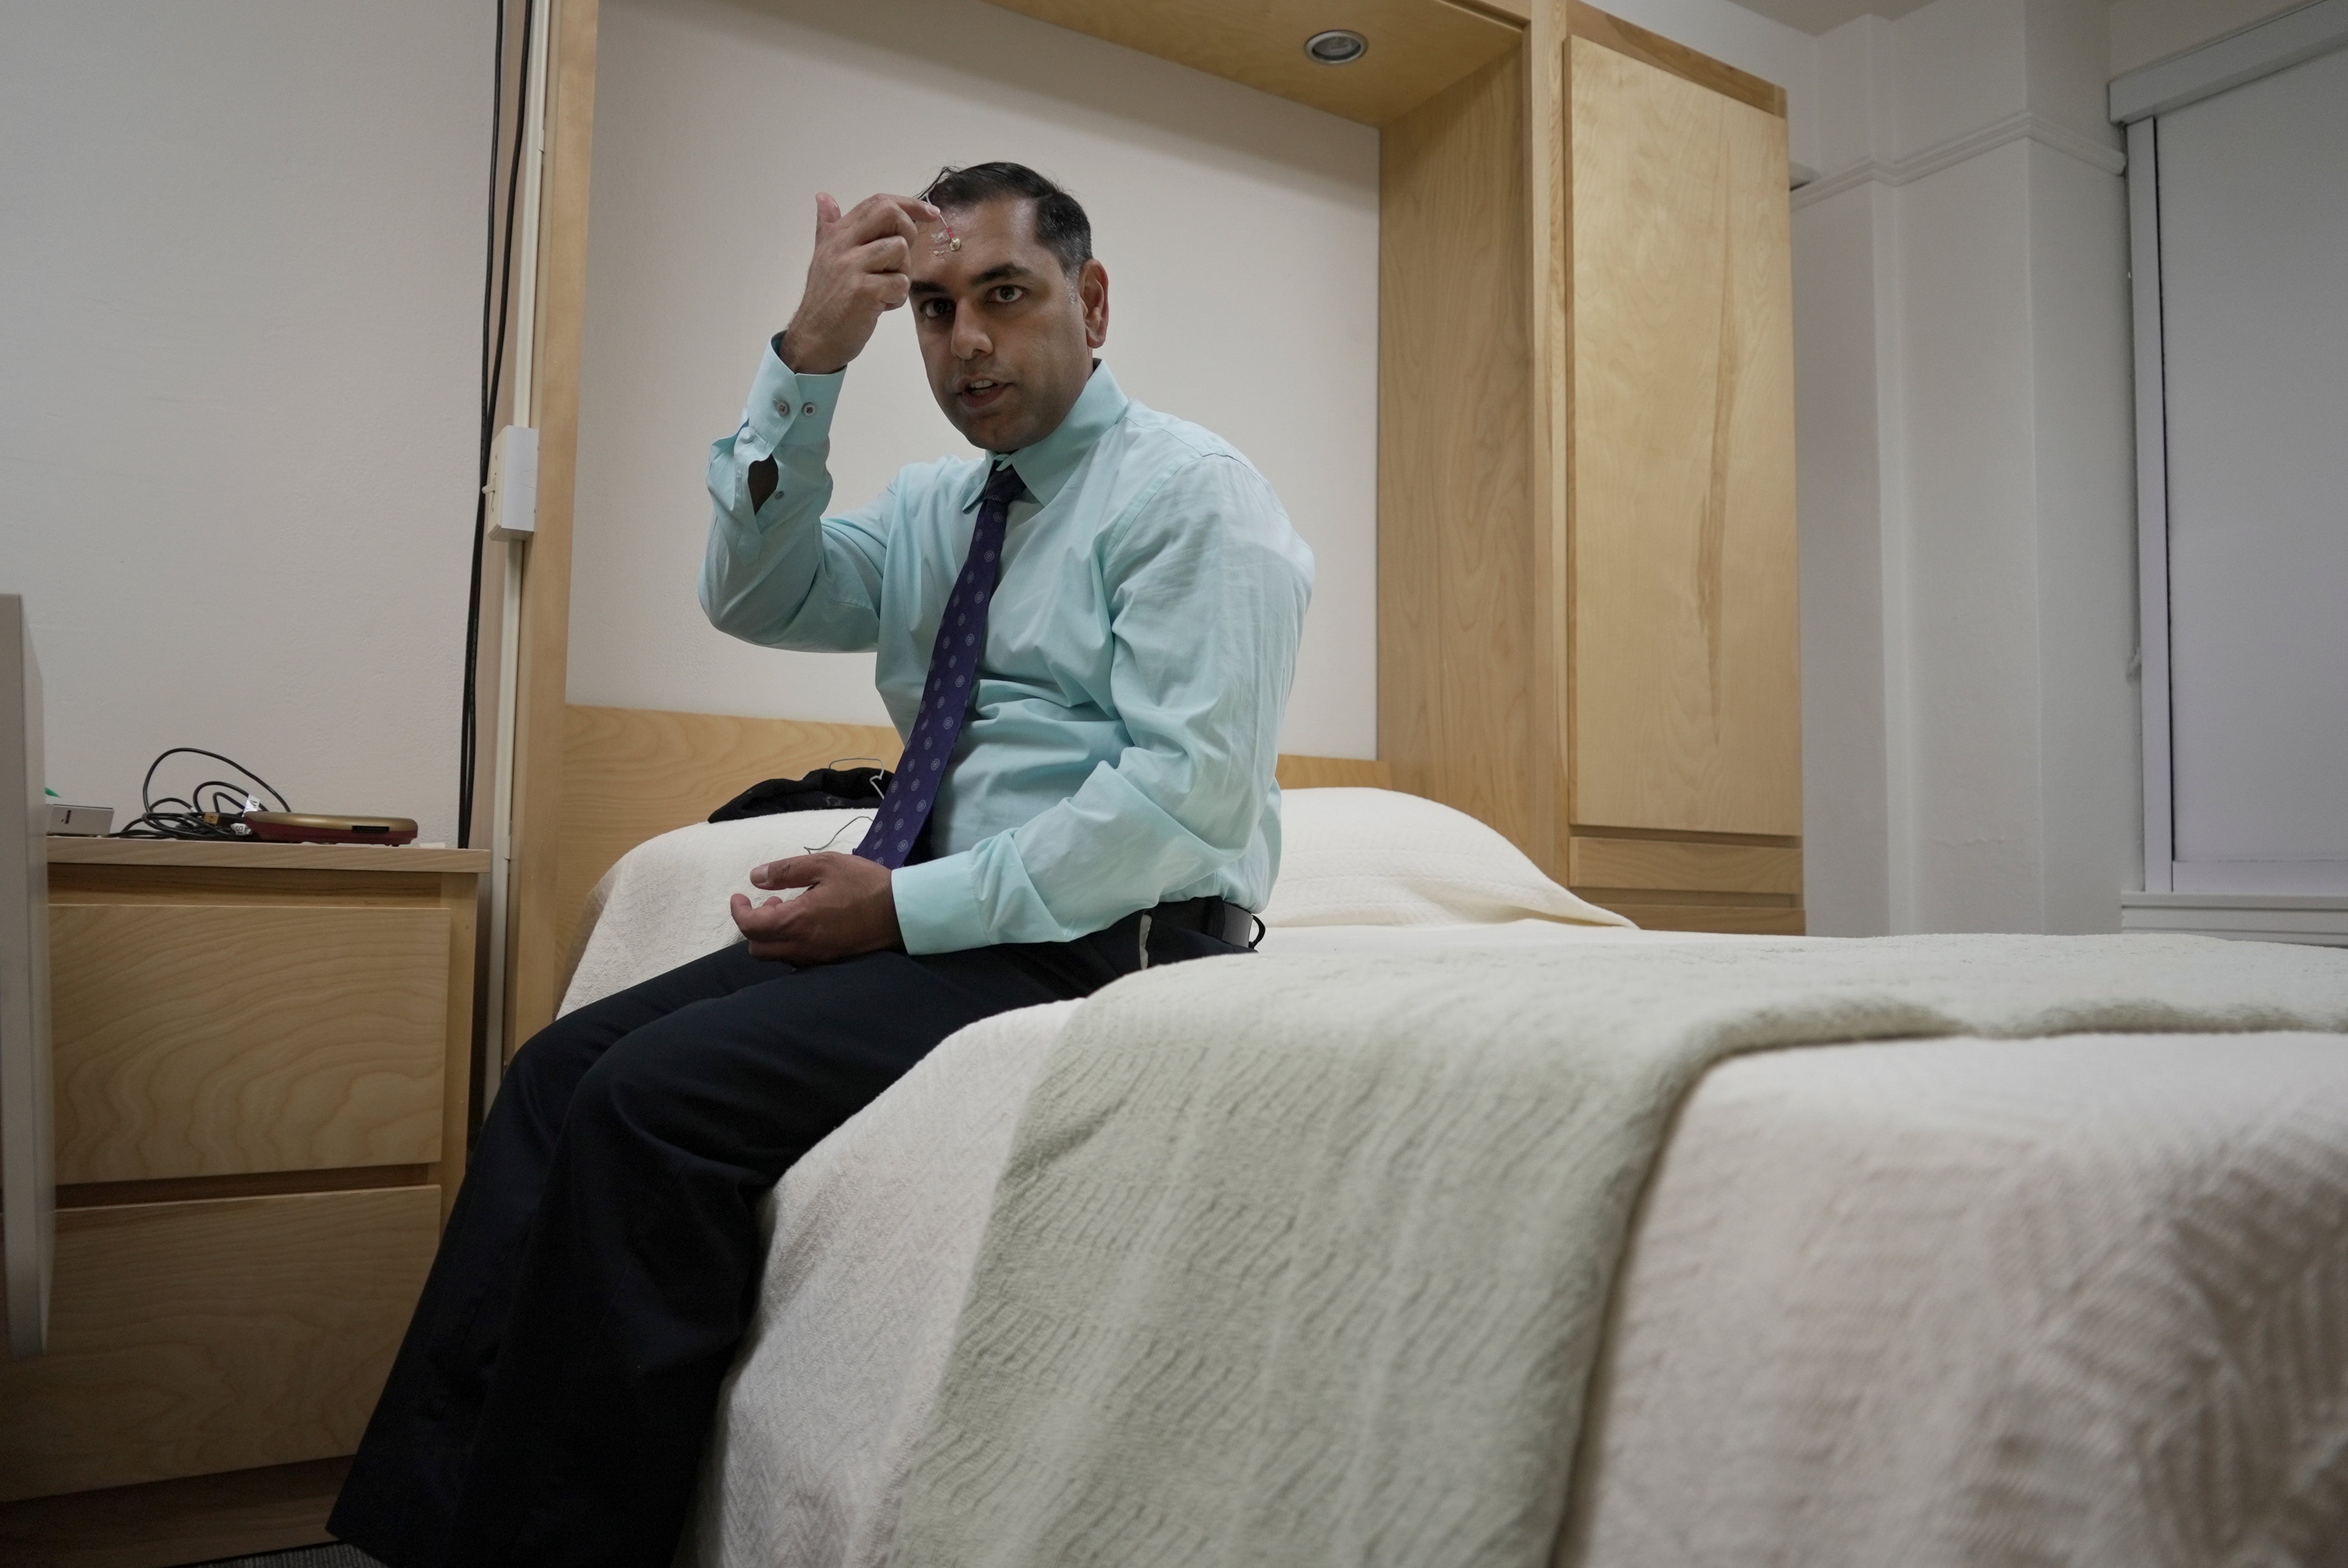 Dr. Roneil Malkani demonstrates the set up for a sleep study at the Center for Circadian & Sleep Medicine